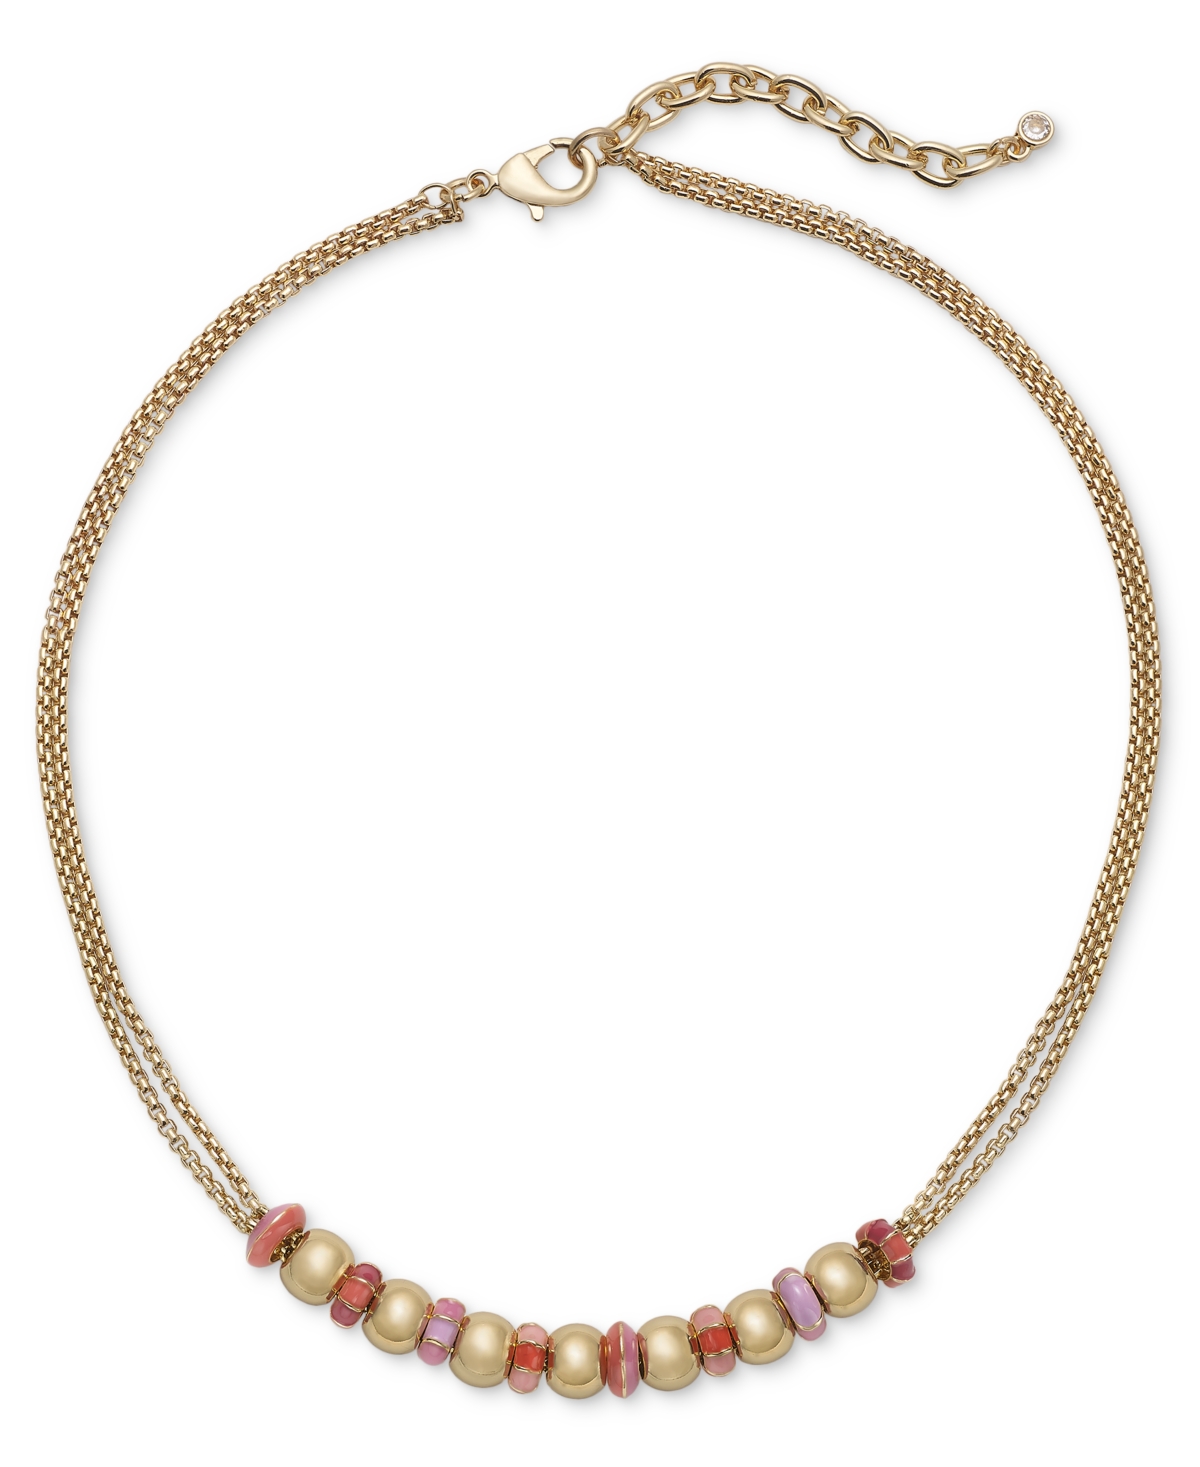 Gold-Tone Mixed Bead Double Chain Necklace, 16" + 2" extender, Created for Macy's - Gold